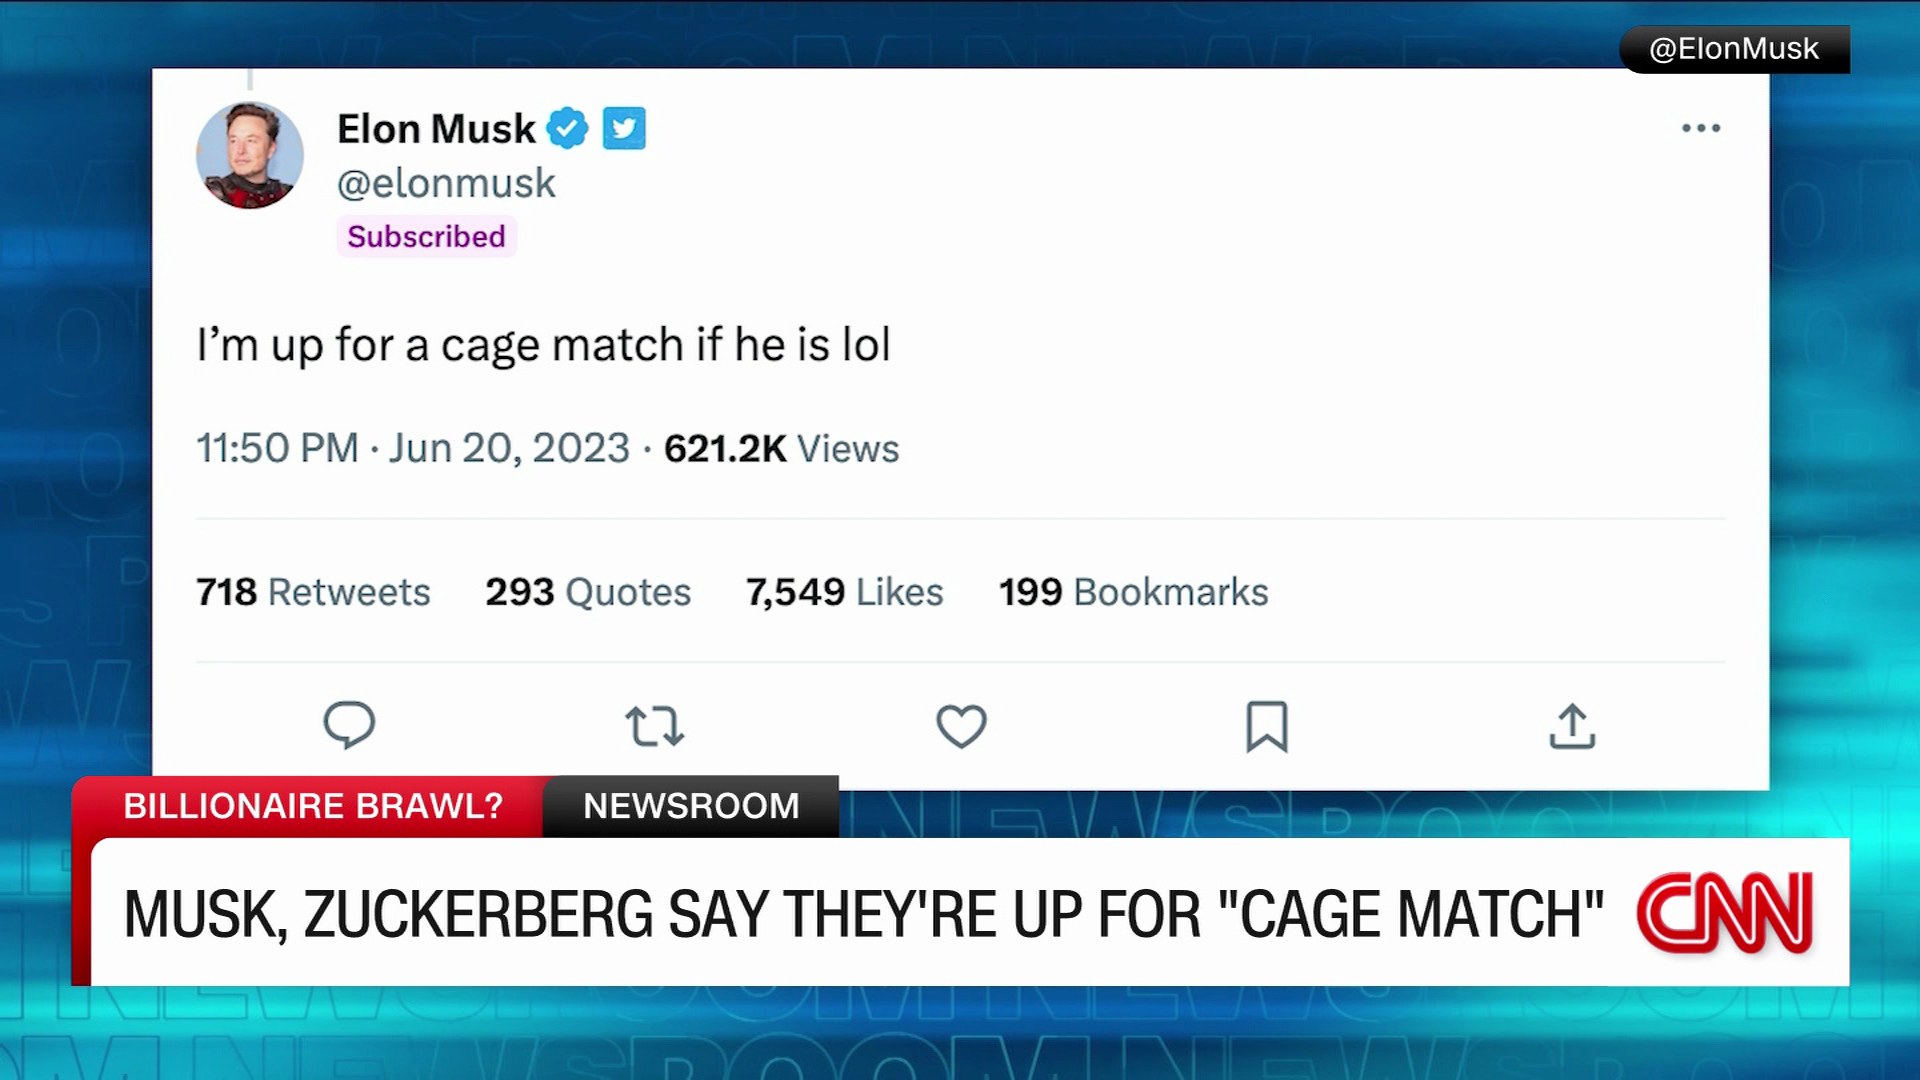 The whole drama started online with this reply by Musk to a guy